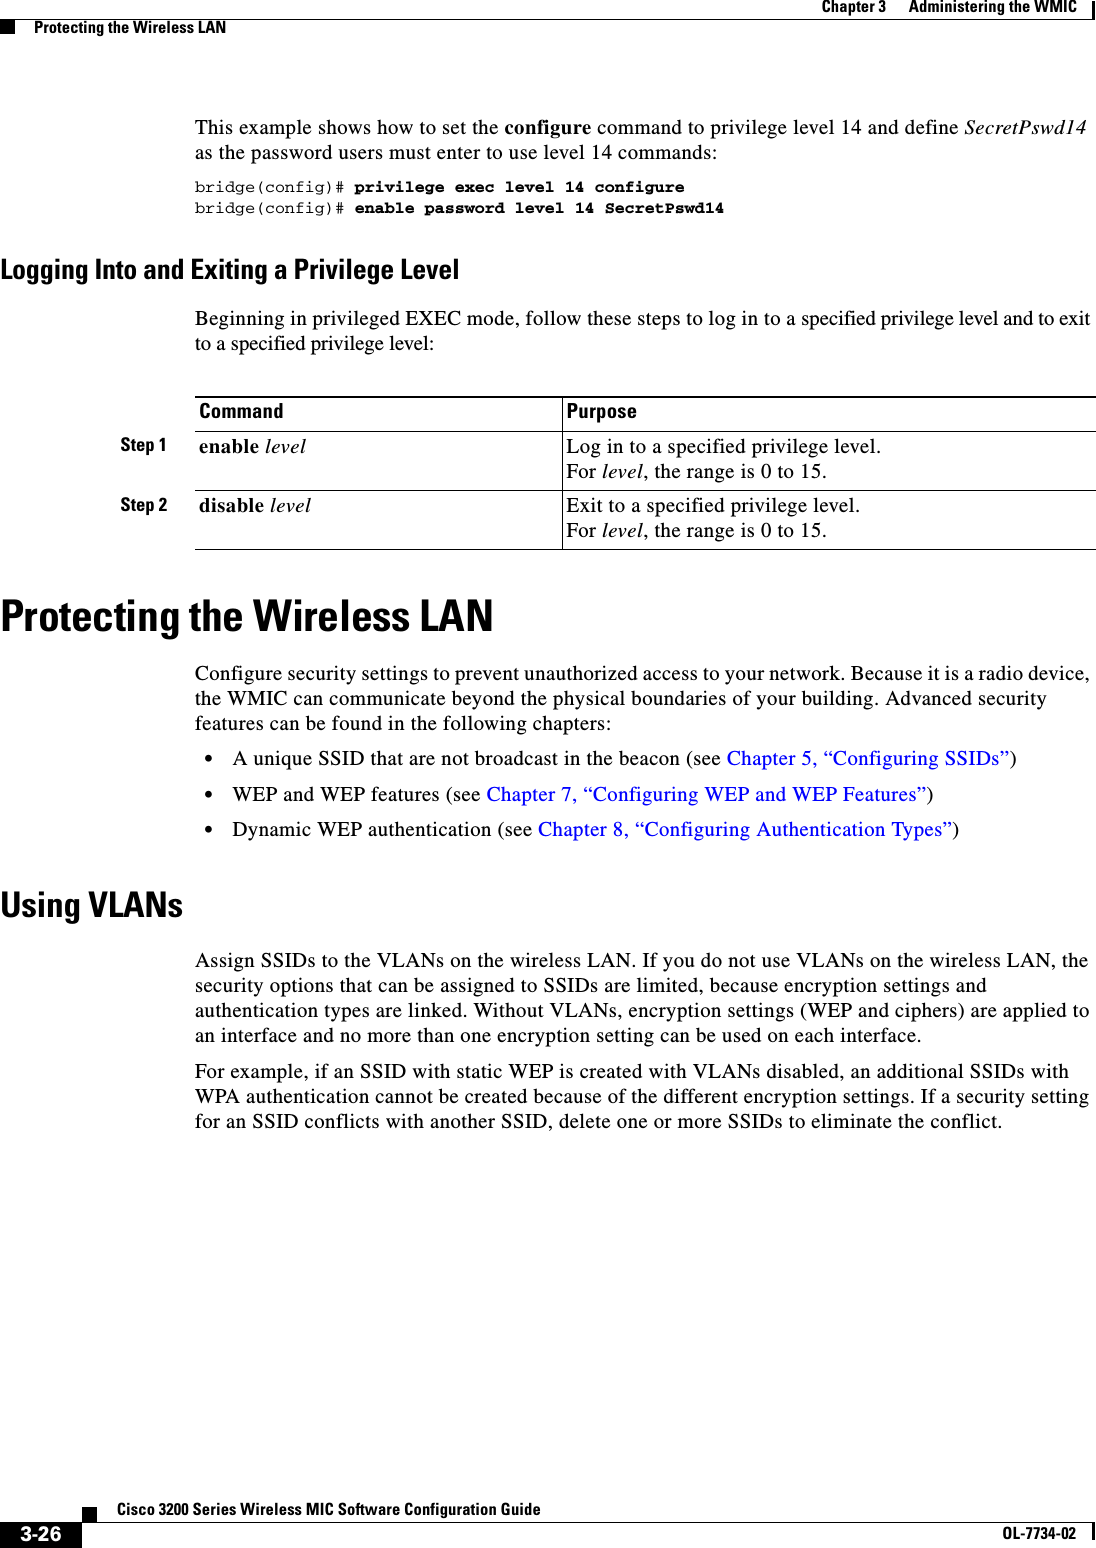 3-26Cisco 3200 Series Wireless MIC Software Configuration GuideOL-7734-02Chapter 3      Administering the WMICProtecting the Wireless LANThis example shows how to set the configure command to privilege level 14 and define SecretPswd14as the password users must enter to use level 14 commands:bridge(config)# privilege exec level 14 configurebridge(config)# enable password level 14 SecretPswd14Logging Into and Exiting a Privilege LevelBeginning in privileged EXEC mode, follow these steps to log in to a specified privilege level and to exit to a specified privilege level:Protecting the Wireless LANConfigure security settings to prevent unauthorized access to your network. Because it is a radio device, the WMIC can communicate beyond the physical boundaries of your building. Advanced security features can be found in the following chapters:•A unique SSID that are not broadcast in the beacon (see Chapter 5, “Configuring SSIDs”)•WEP and WEP features (see Chapter 7, “Configuring WEP and WEP Features”)•Dynamic WEP authentication (see Chapter 8, “Configuring Authentication Types”)Using VLANsAssign SSIDs to the VLANs on the wireless LAN. If you do not use VLANs on the wireless LAN, the security options that can be assigned to SSIDs are limited, because encryption settings and authentication types are linked. Without VLANs, encryption settings (WEP and ciphers) are applied to an interface and no more than one encryption setting can be used on each interface. For example, if an SSID with static WEP is created with VLANs disabled, an additional SSIDs with WPA authentication cannot be created because of the different encryption settings. If a security setting for an SSID conflicts with another SSID, delete one or more SSIDs to eliminate the conflict.Command PurposeStep 1 enable level Log in to a specified privilege level.For level, the range is 0 to 15.Step 2 disable level Exit to a specified privilege level.For level, the range is 0 to 15.